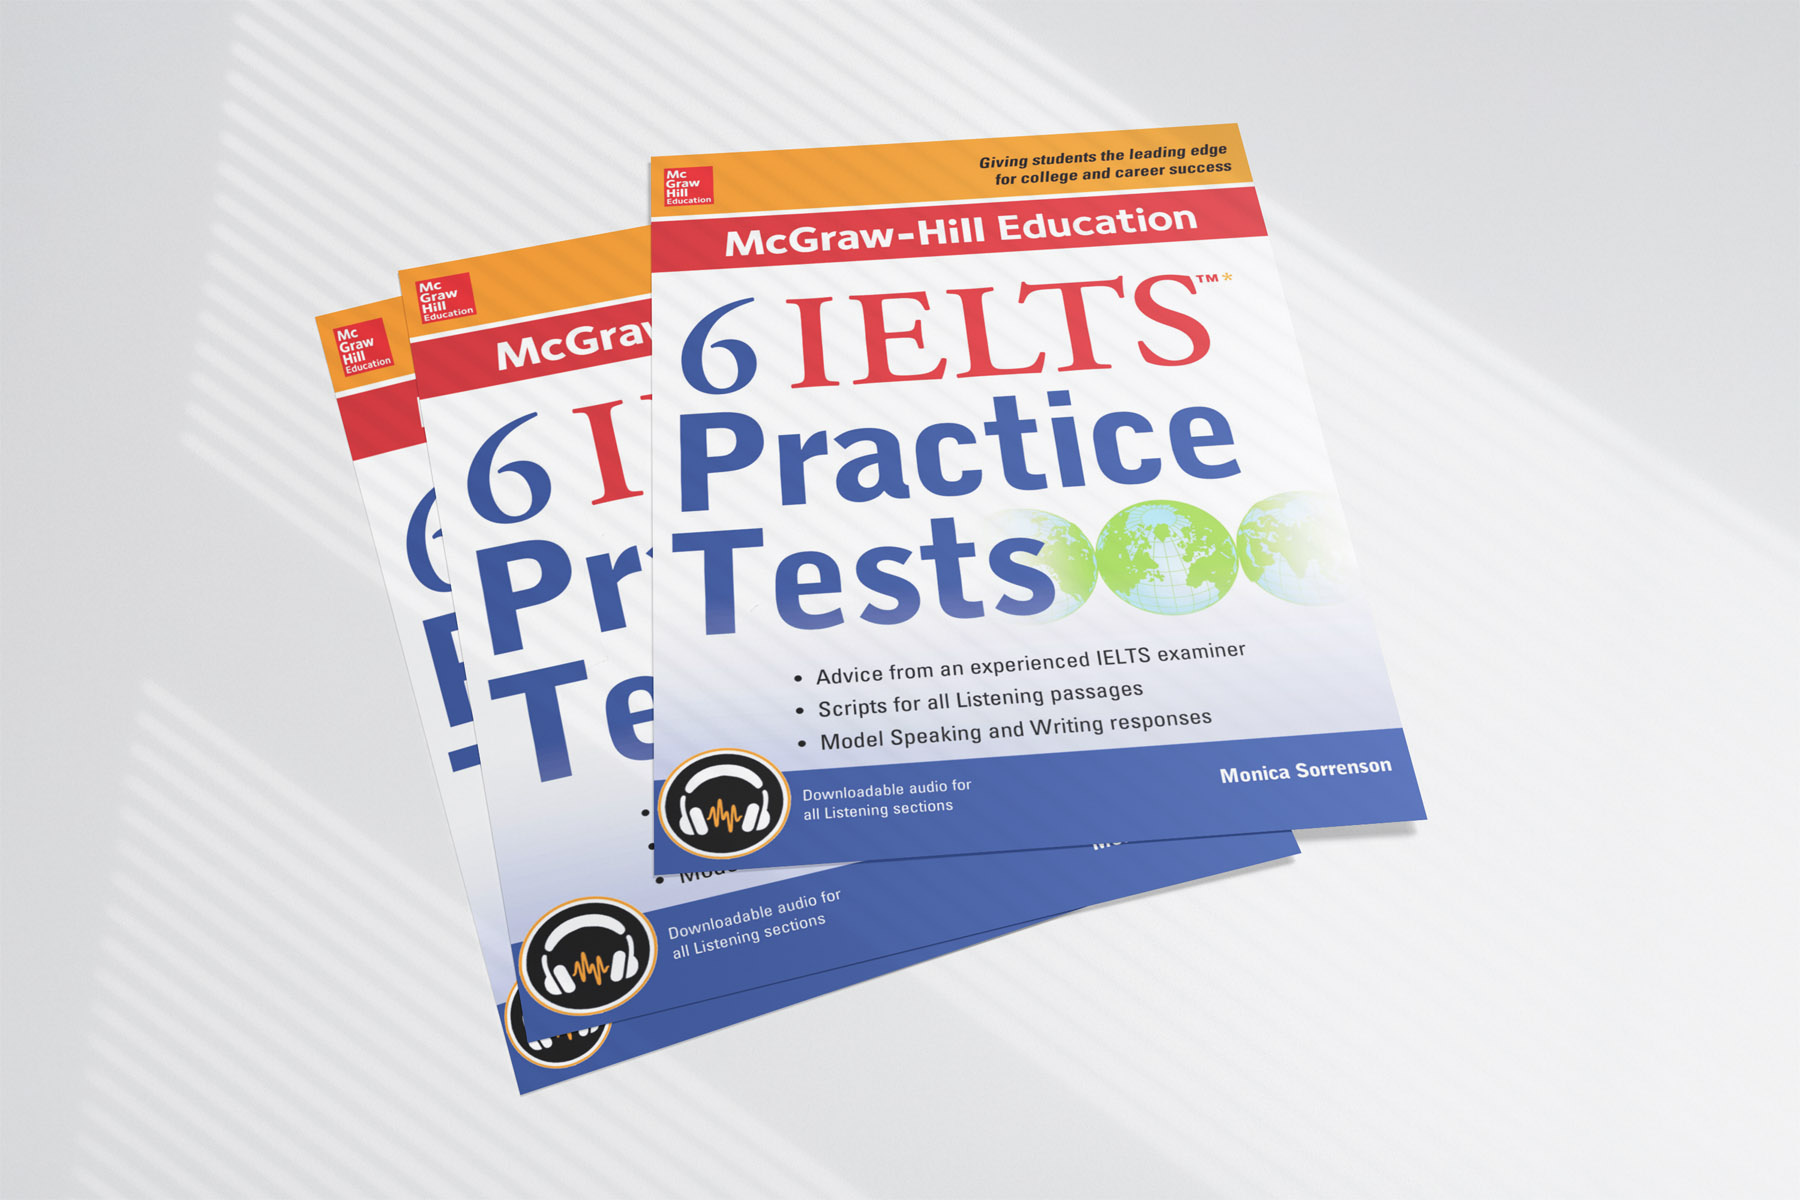 McGraw-Hill Education 6 IELTS Practice Tests